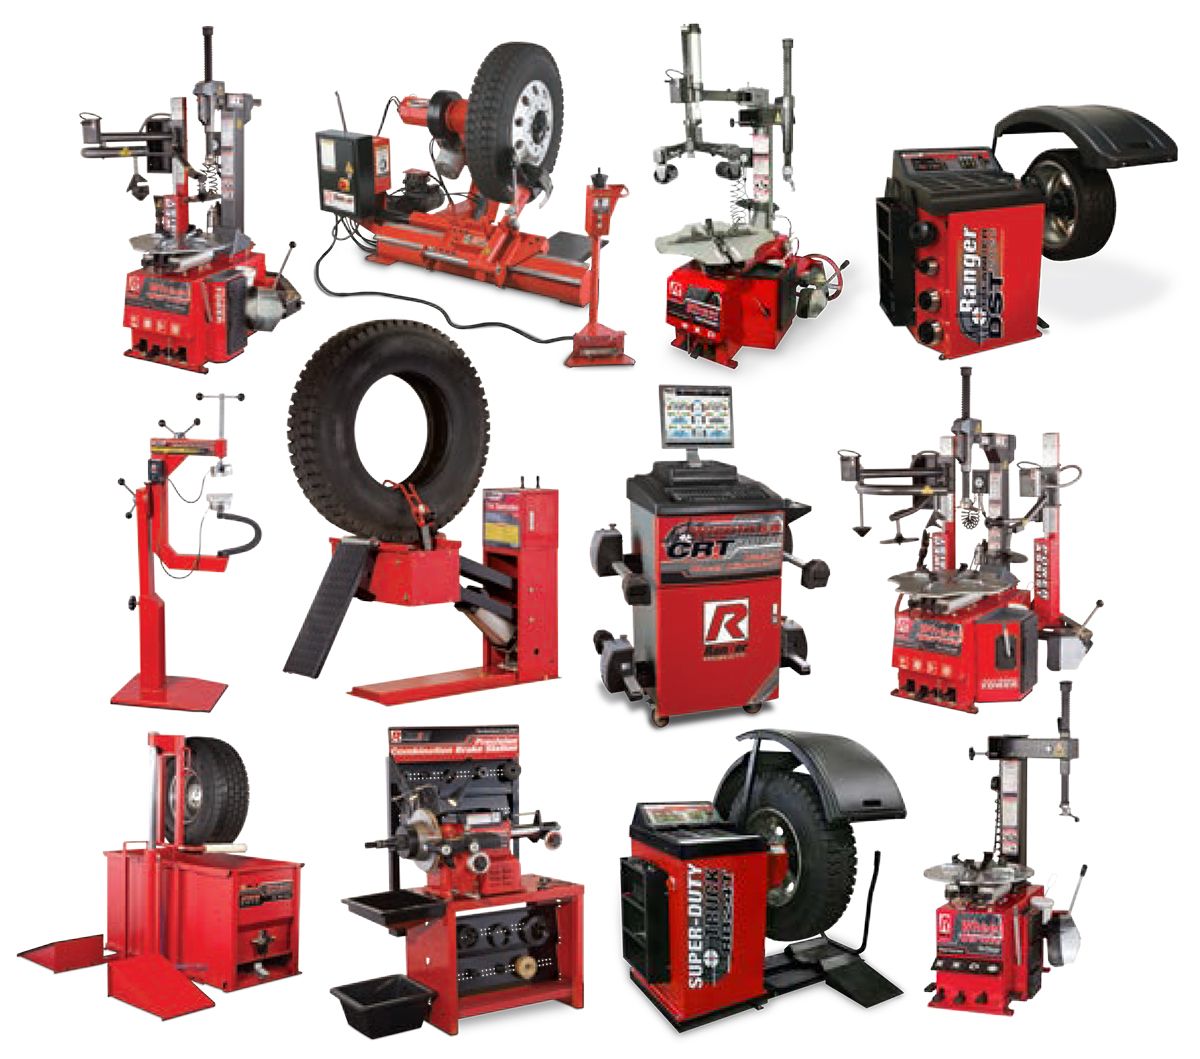 Ranger Products Wheel Service and Shop Equipment